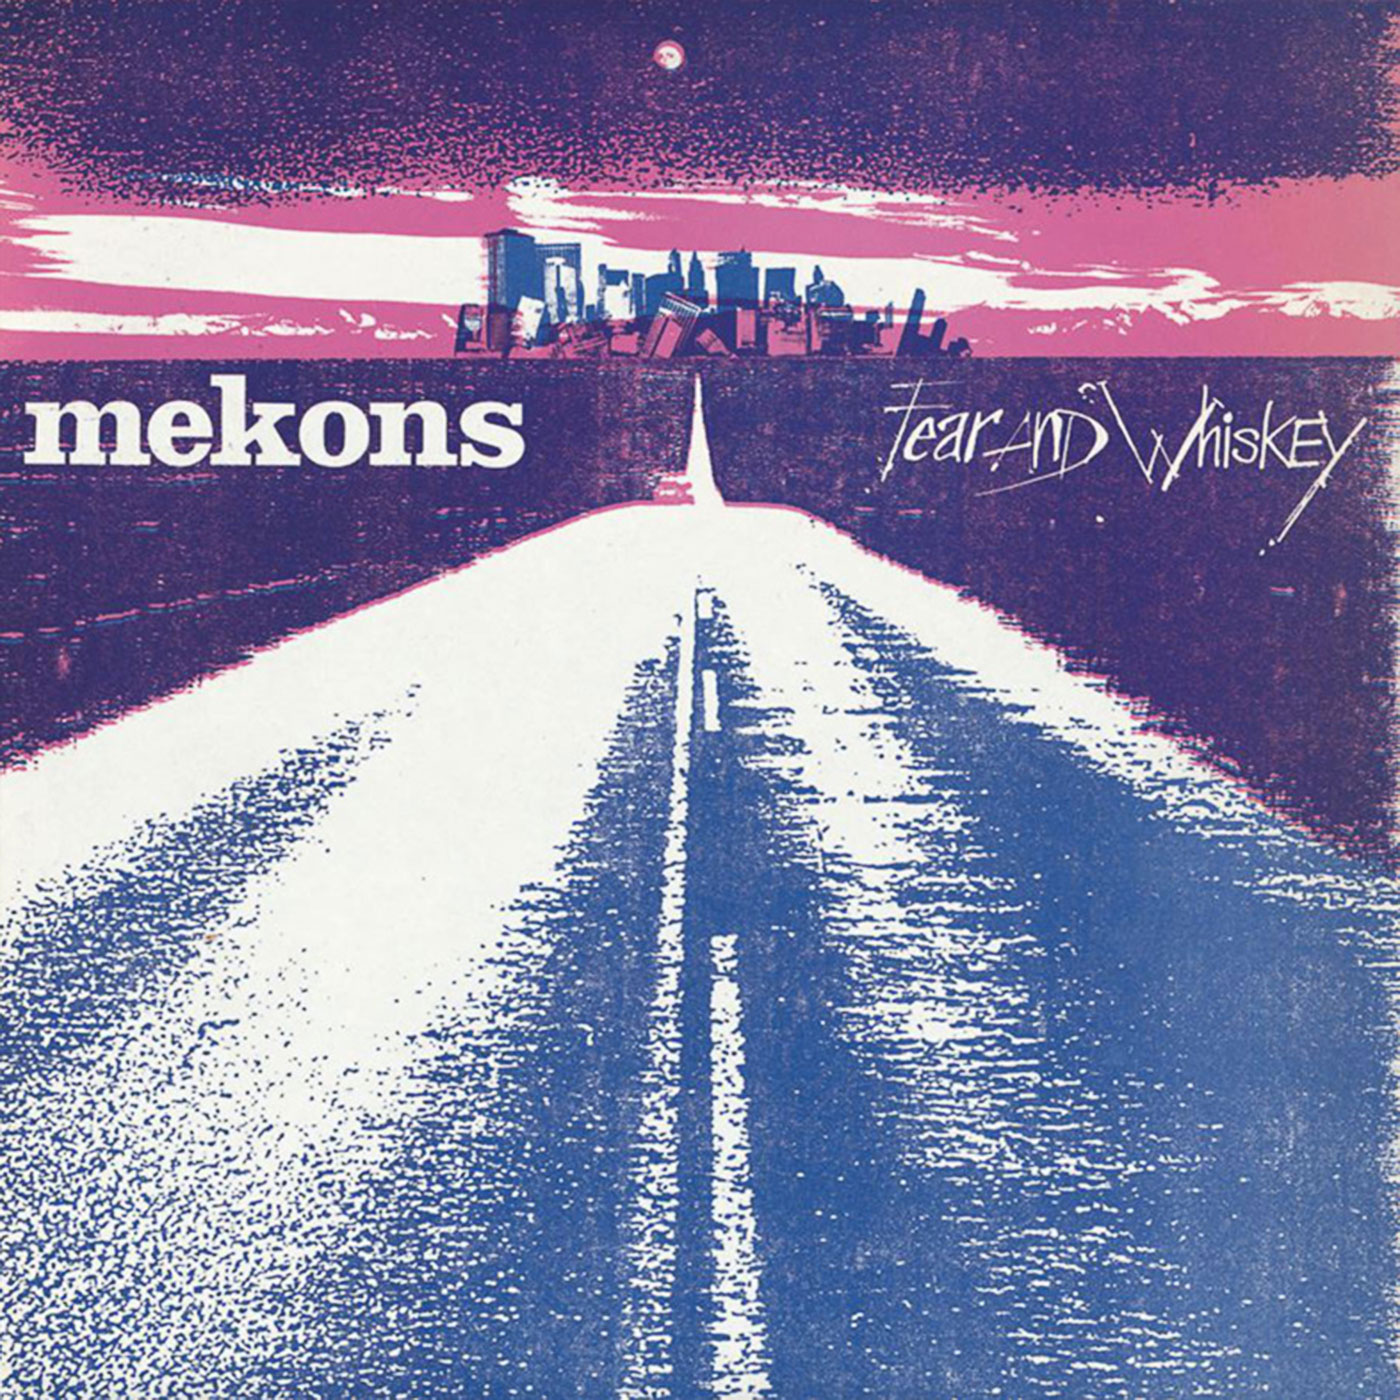 553 The Mekons – Fear and Whiskey